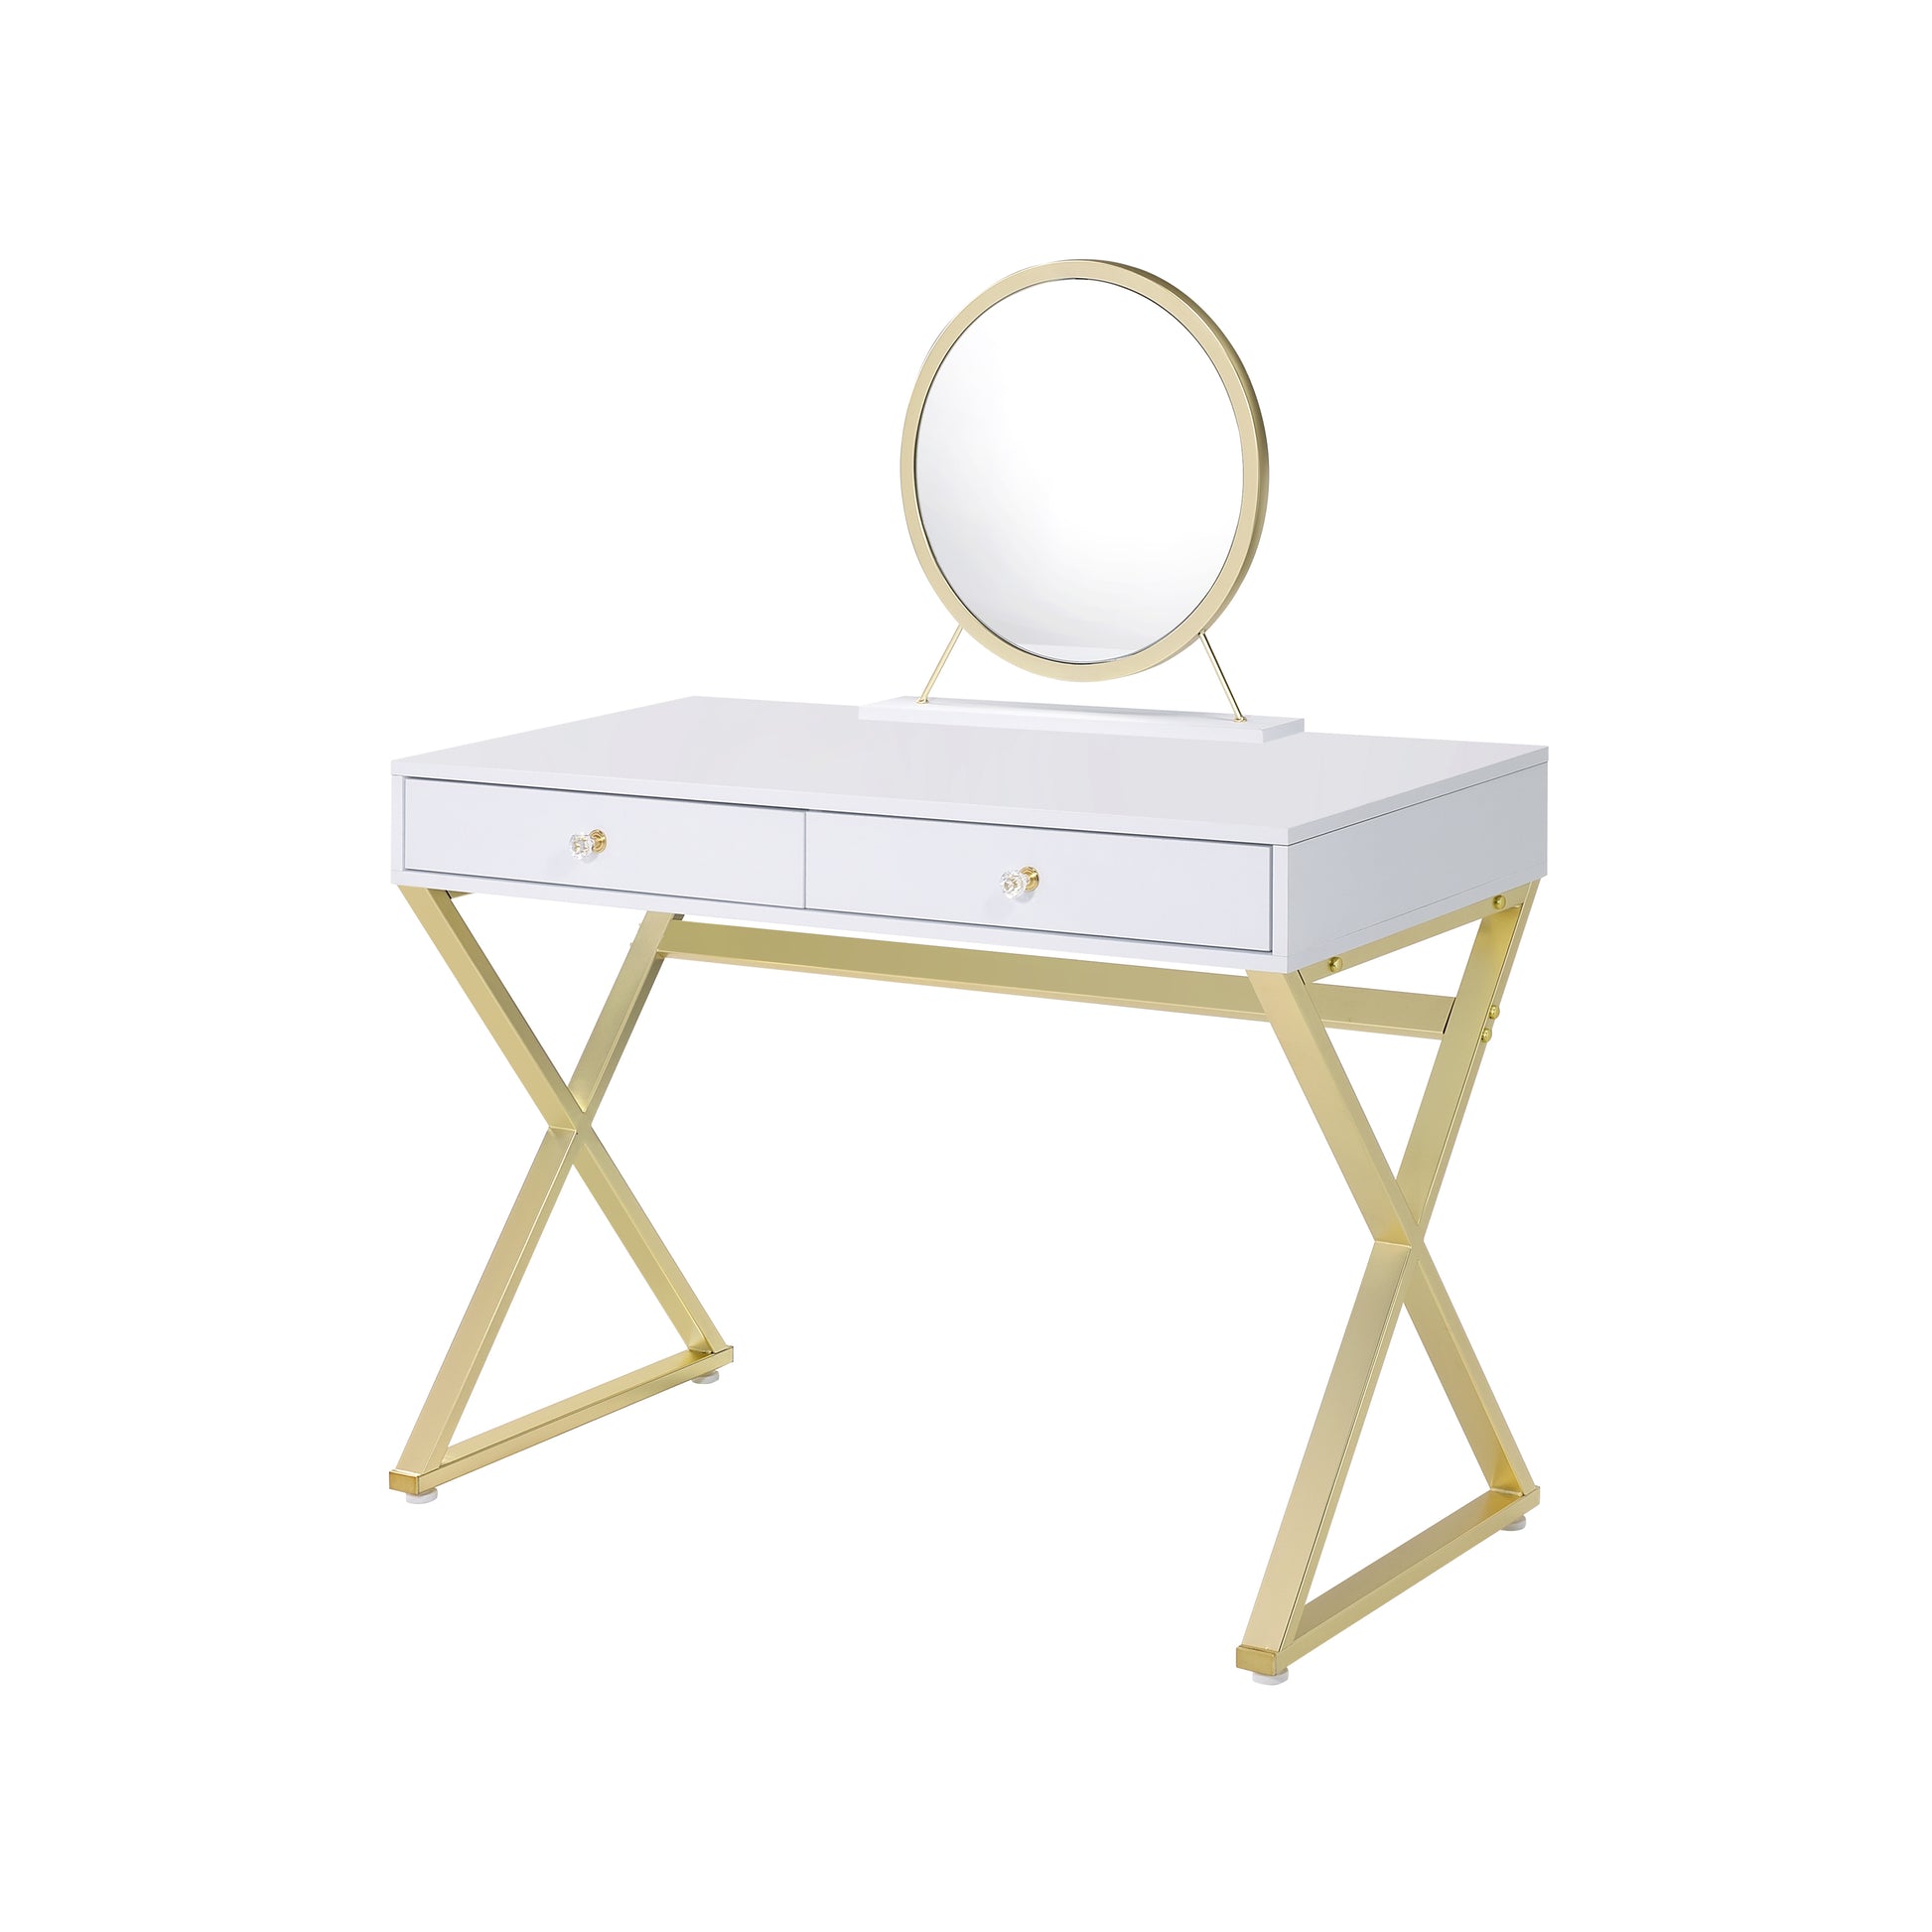 ACME Coleen Vanity Desk w/Mirror & Jewelry Tray in White & Gold Finish AC00667